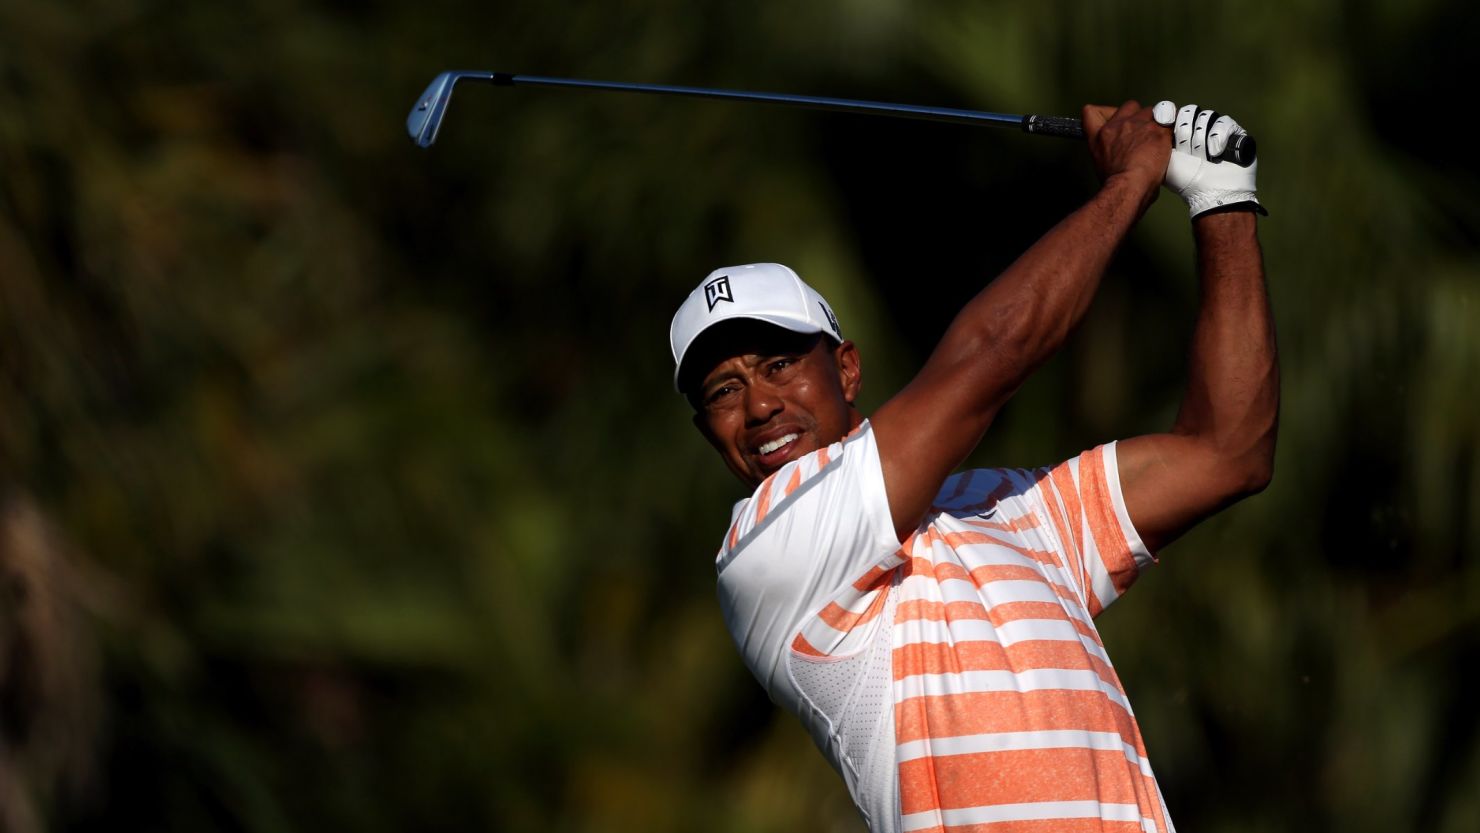 Tiger Woods makes another confident shot during his seven-under-par 65 at Doral's Blue Monster course in Florida.